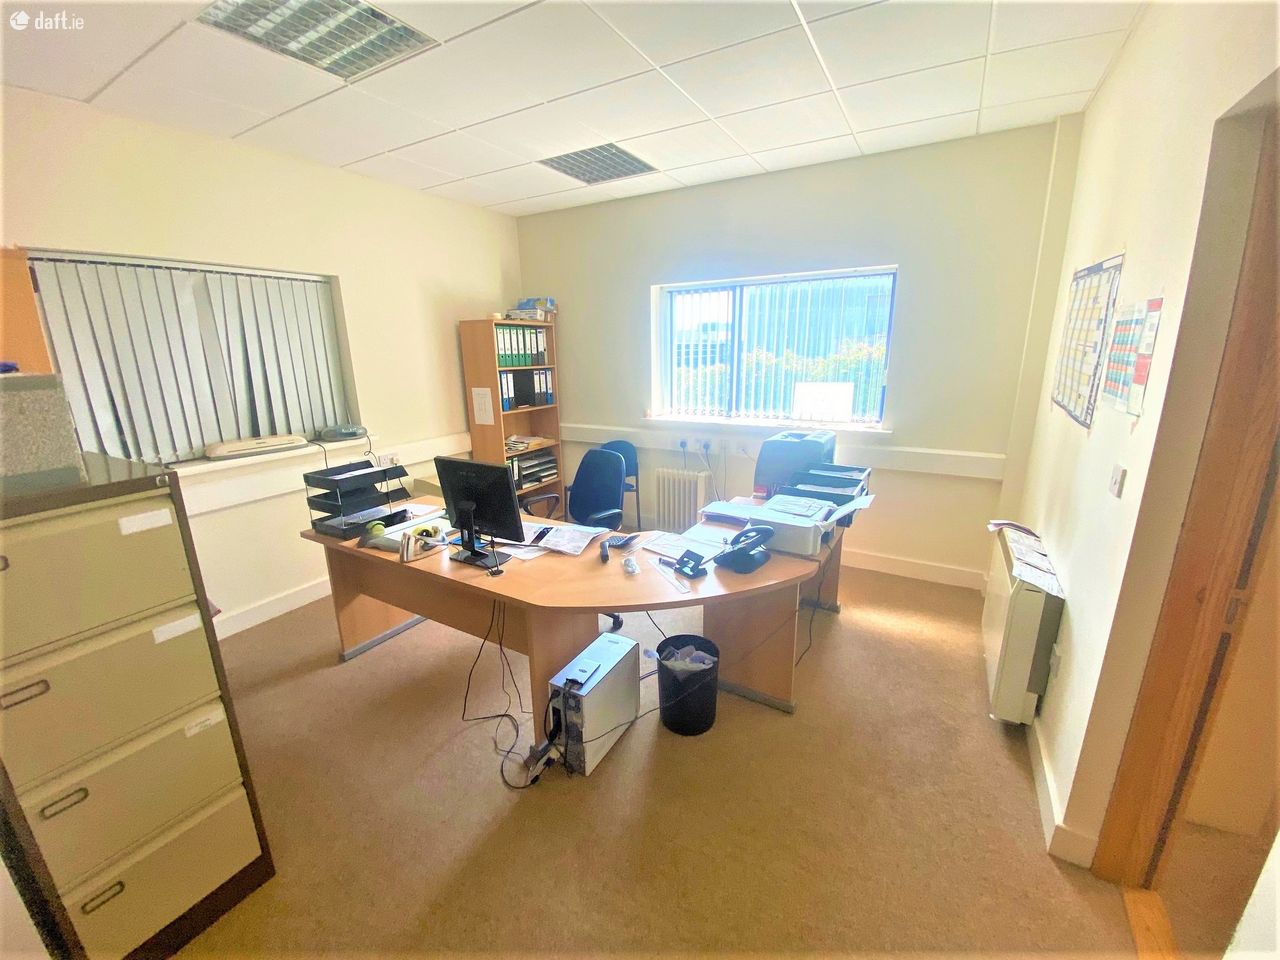 India Unit 1, Cessna Avenue, Waterford Airport Business Park, Killowen, Waterford City, Co. Waterford